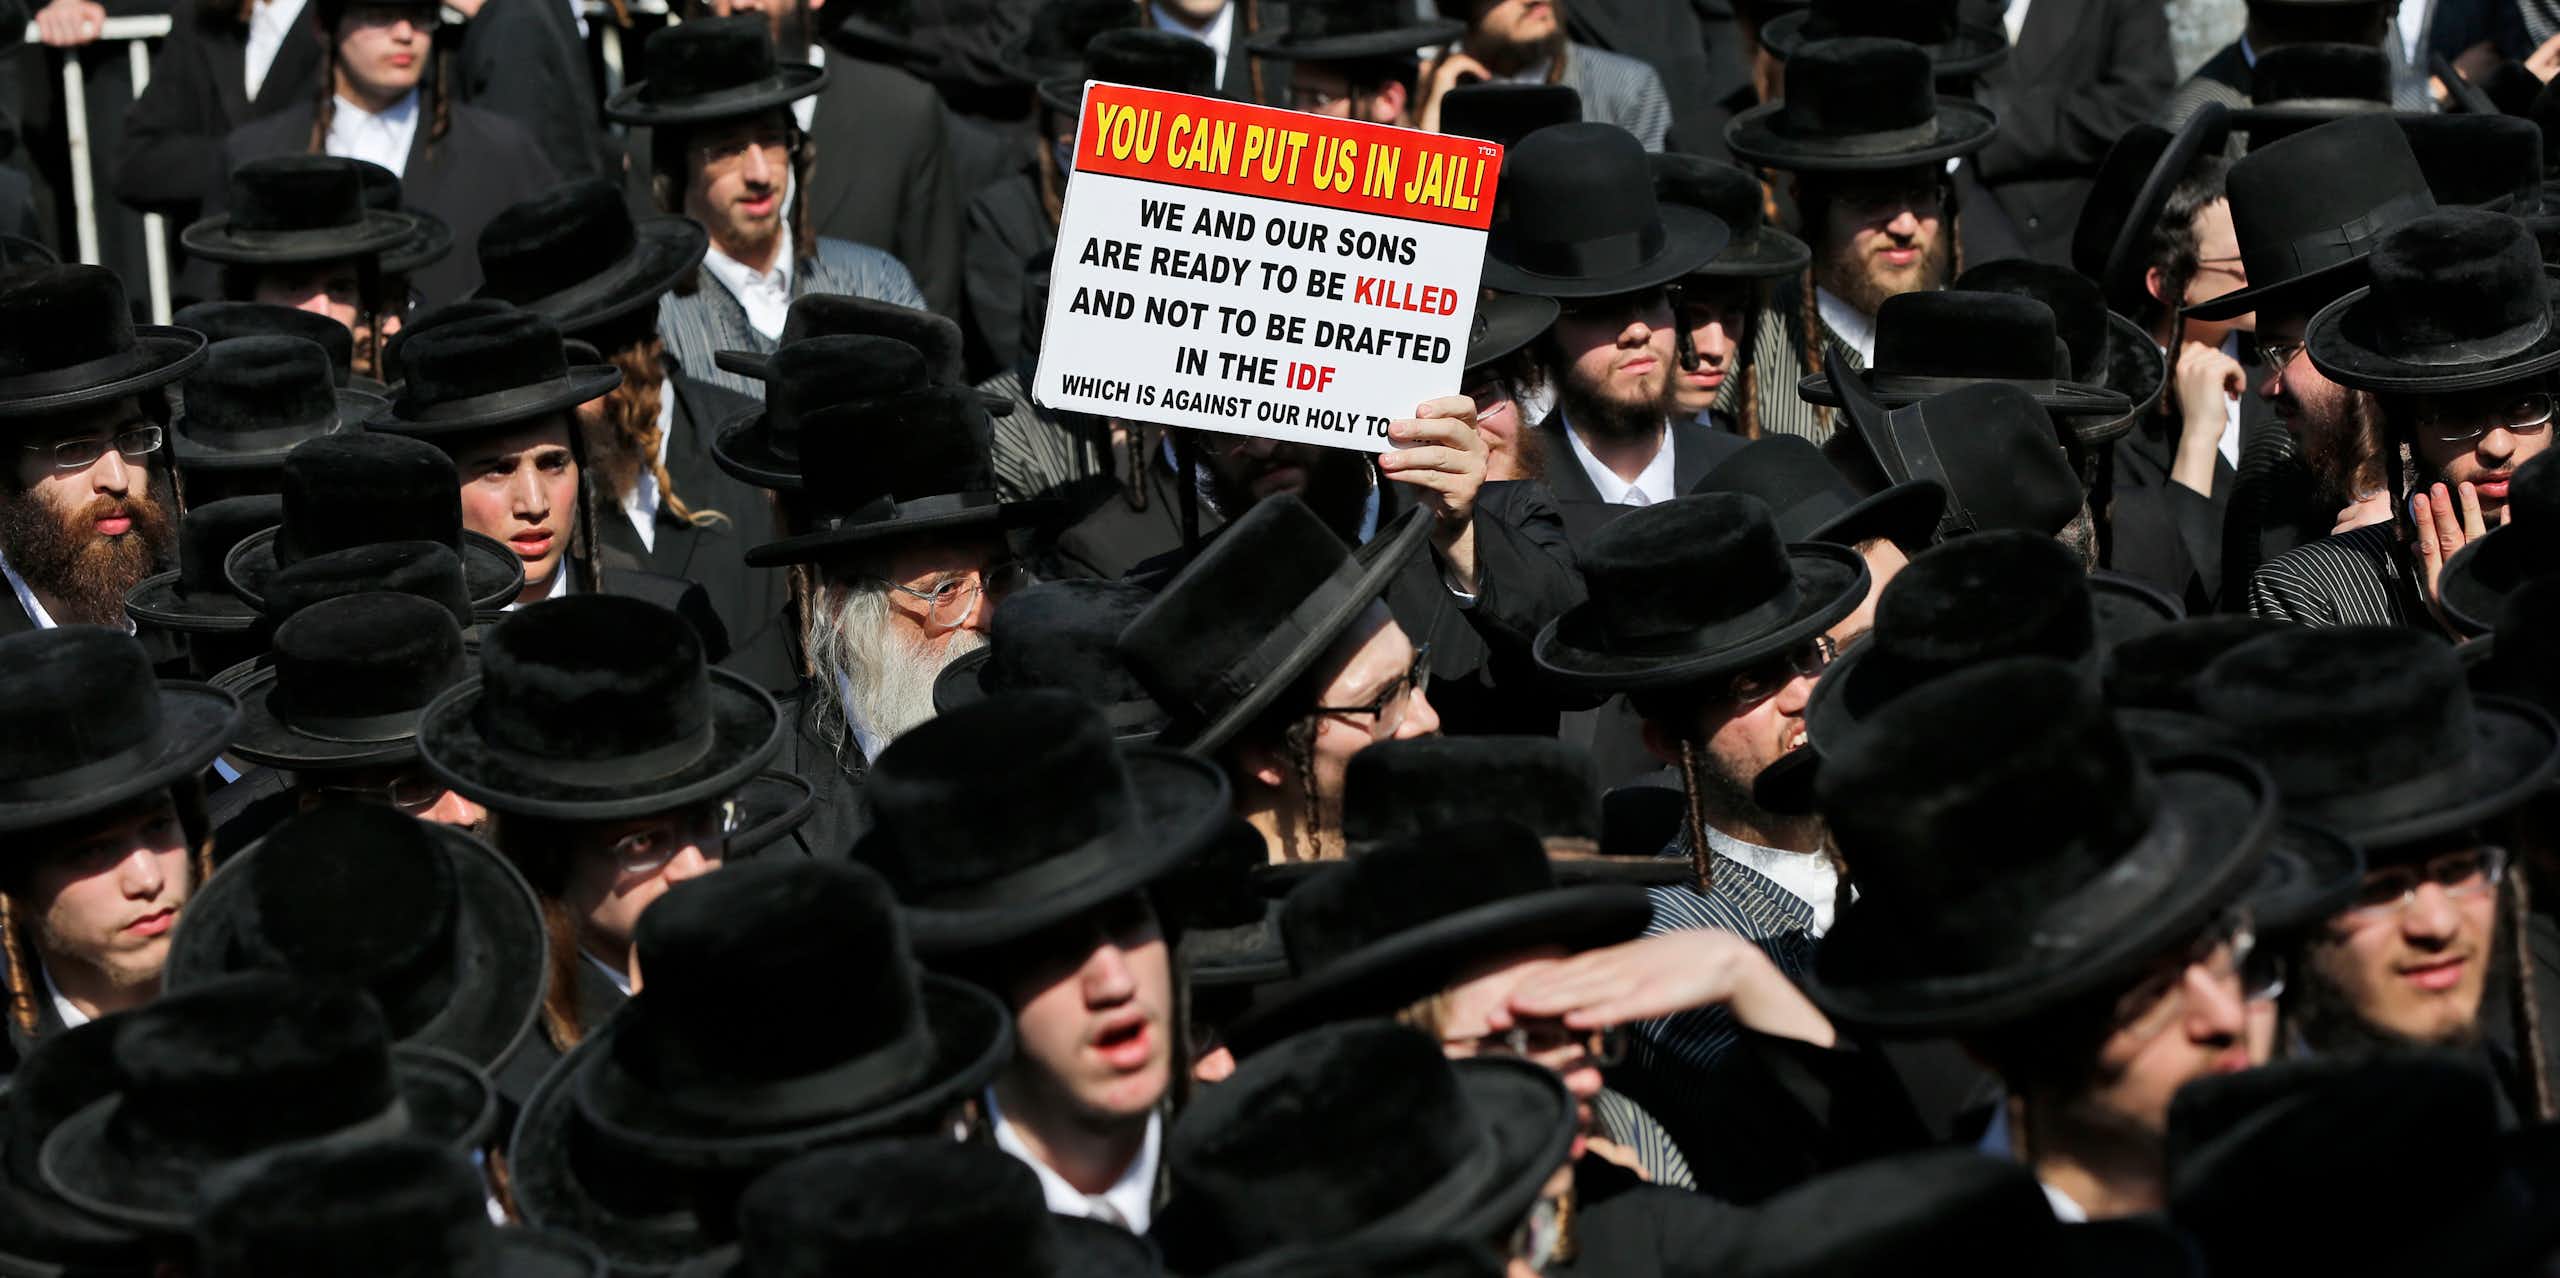 Ultra-Orthodox Haredi Jews march against being conscripted into the IDF, 